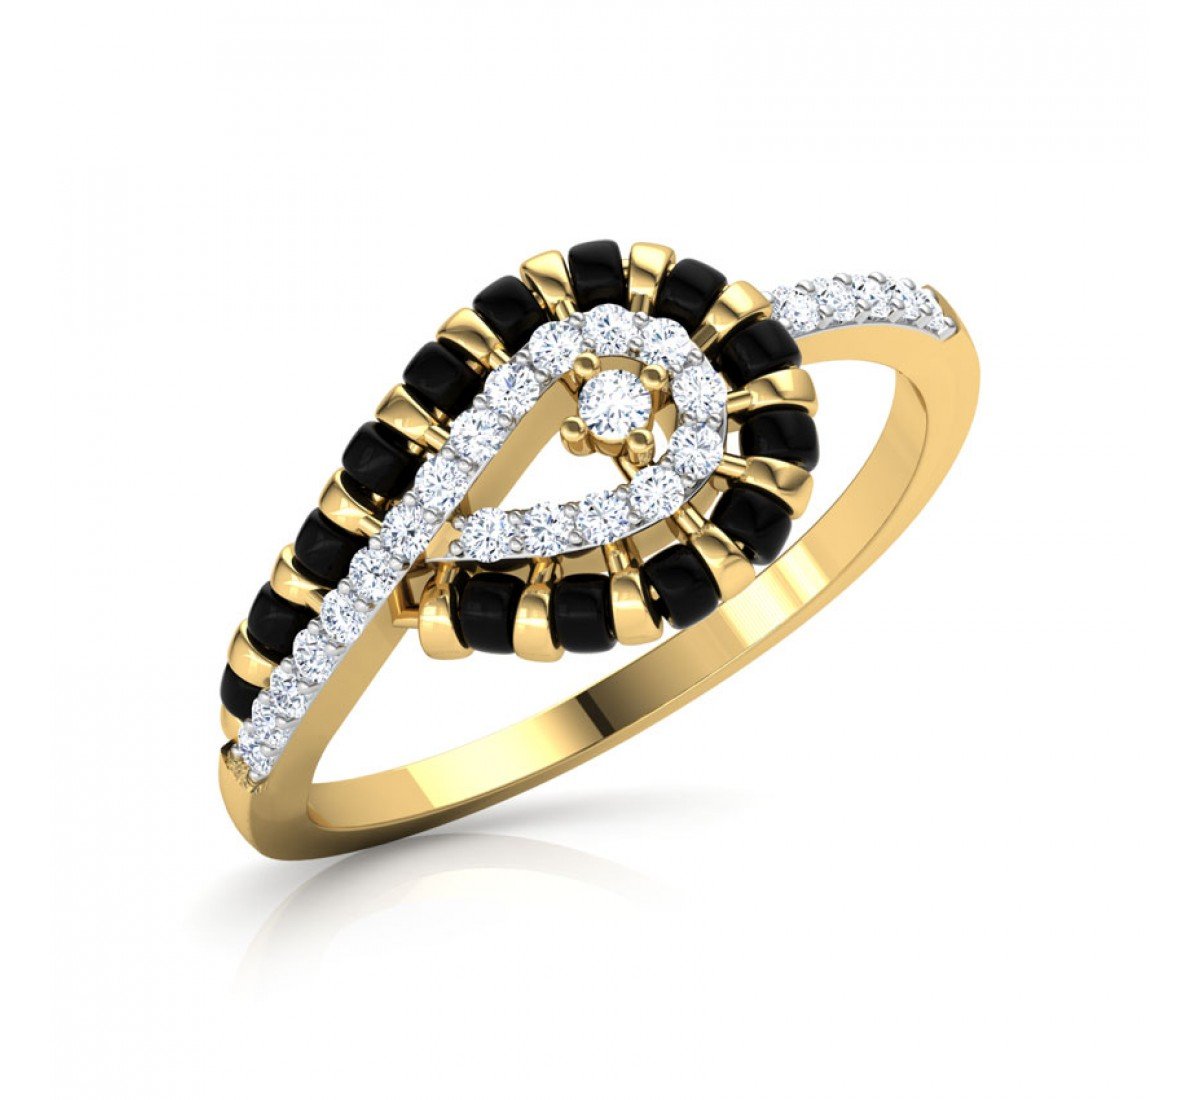 The Best Diamond Jewellery Gifts for Your Wife this Diwali - The Caratlane